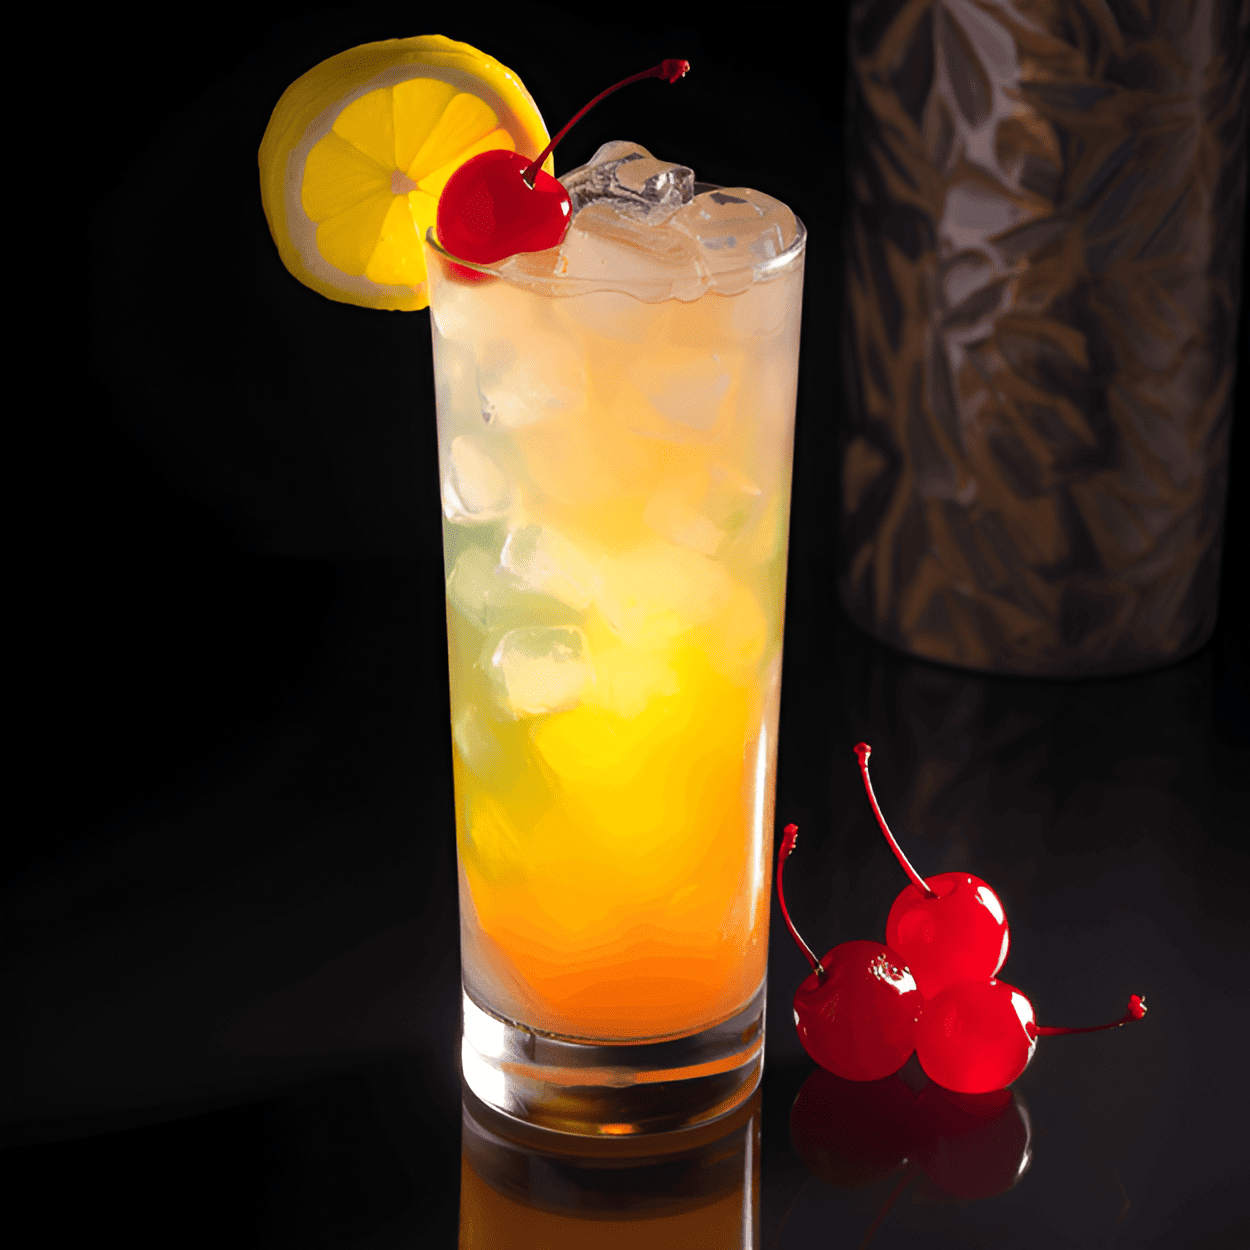 High Tide Cocktail Recipe - The High Tide cocktail is a delightful blend of sweet and sour. The tropical fruits give it a sweet, juicy flavor, while the lime juice adds a tangy kick. The rum adds a strong, warming note, making it a well-balanced and refreshing cocktail.